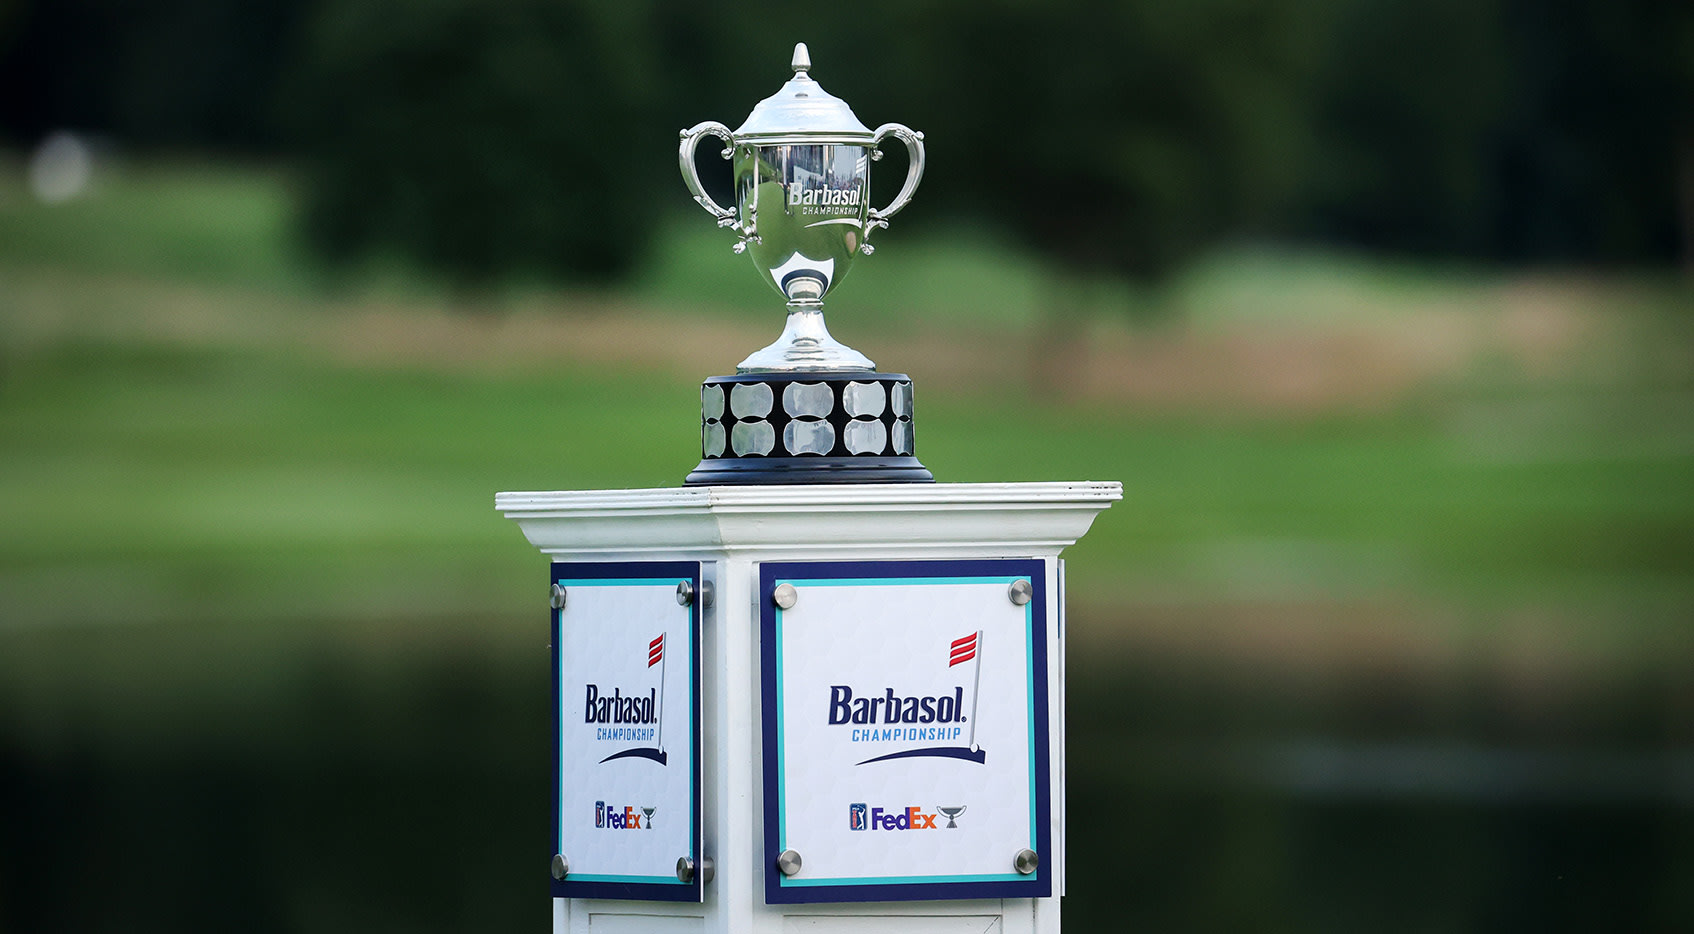 How to Watch the Barbasol Championship, Round 1 Featured Groups, live